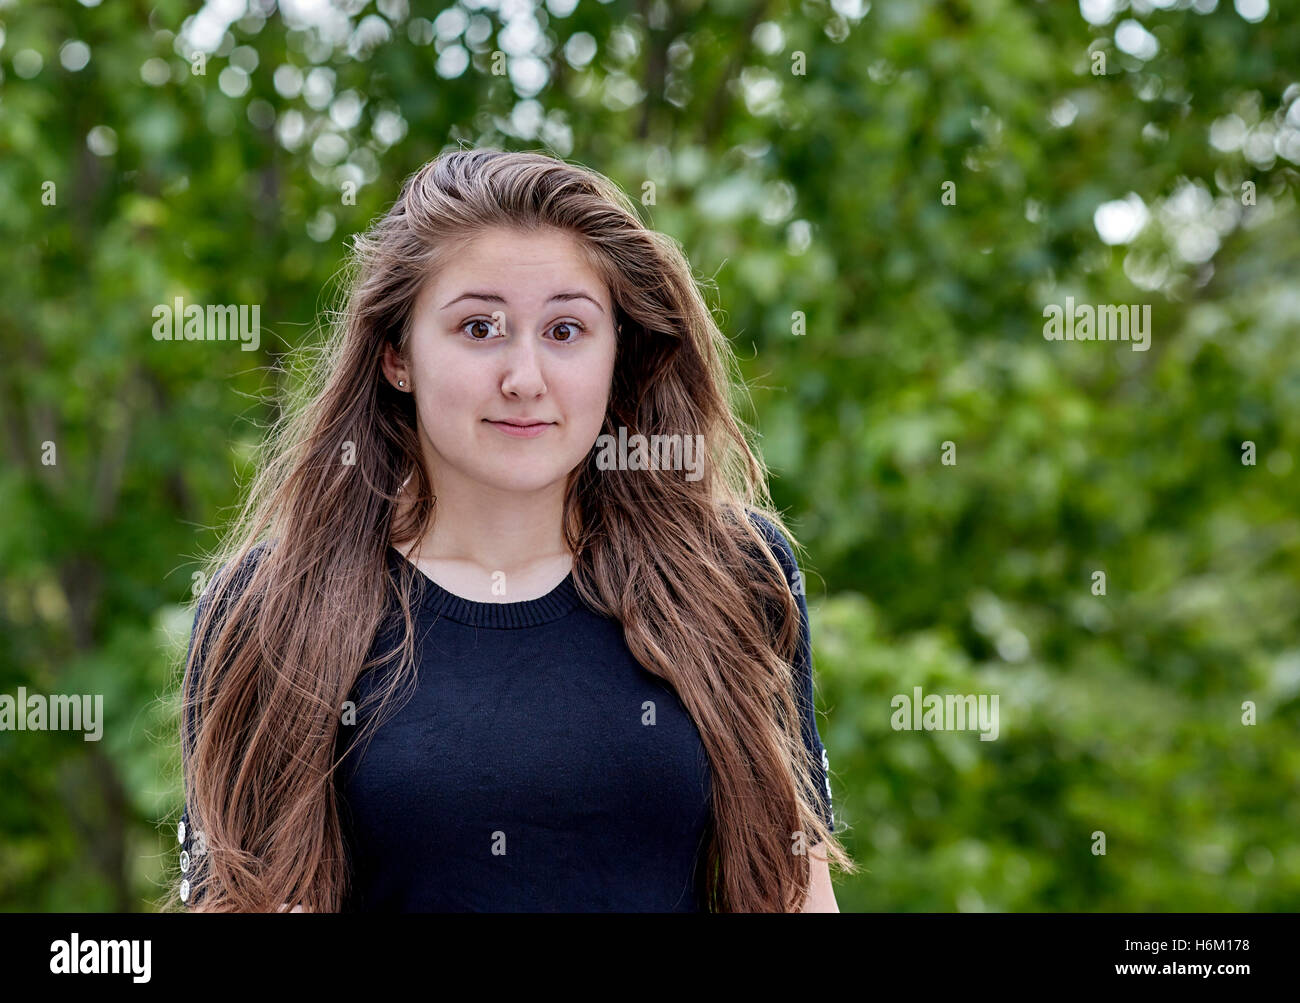 Fearful young woman with long hair expressiing apprehension and fear Stock Photo